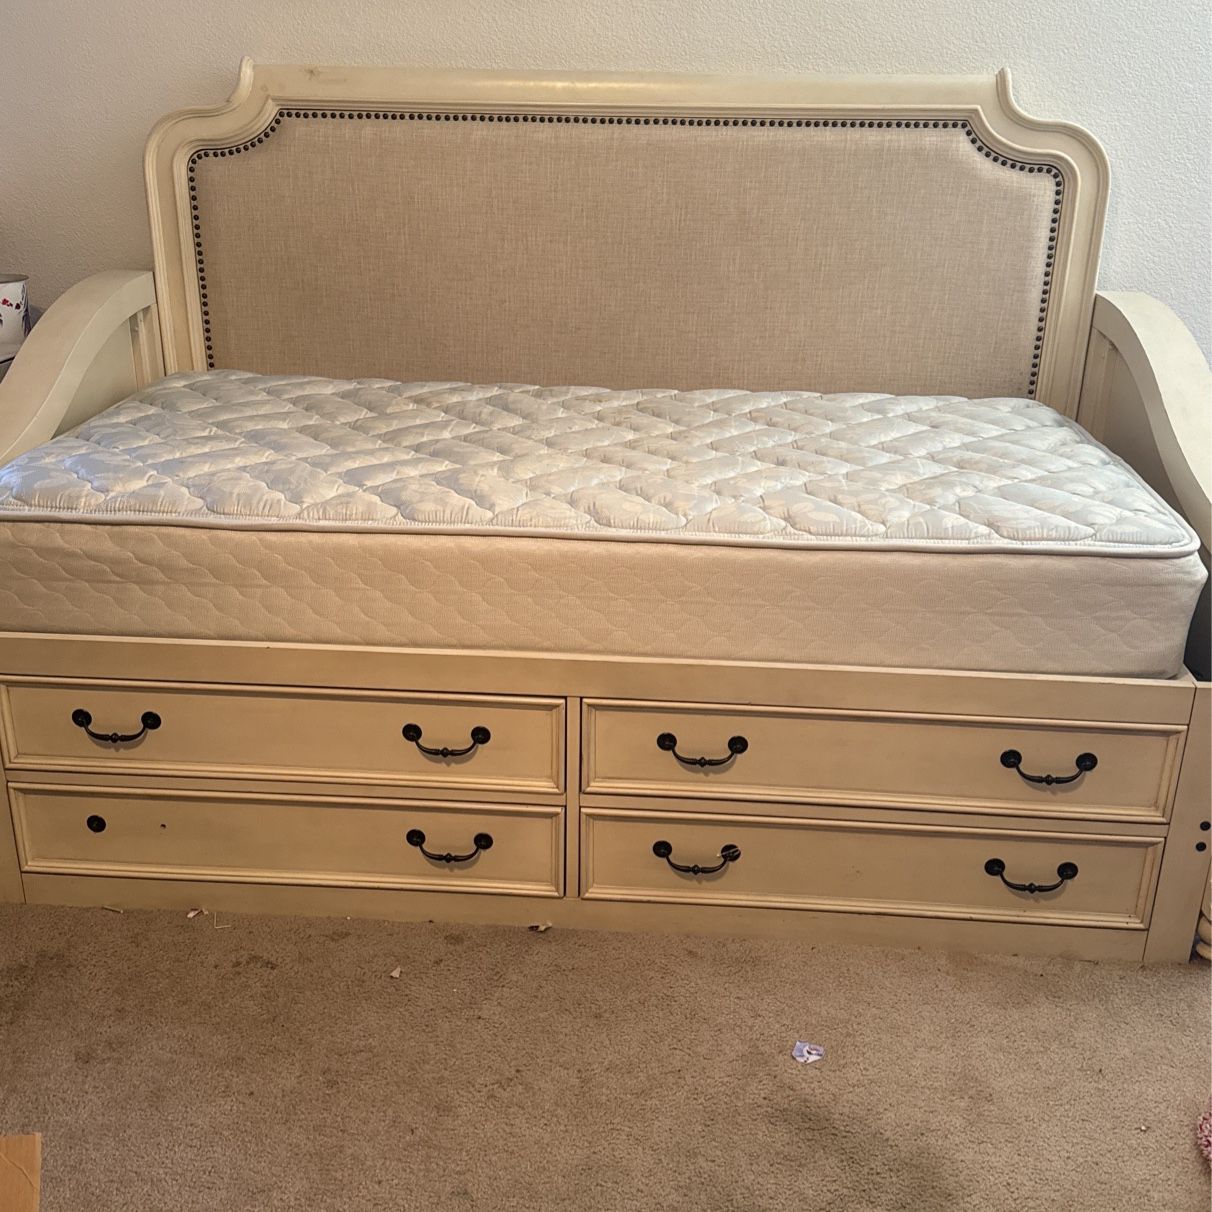 Ashely Furniture Twin Bed